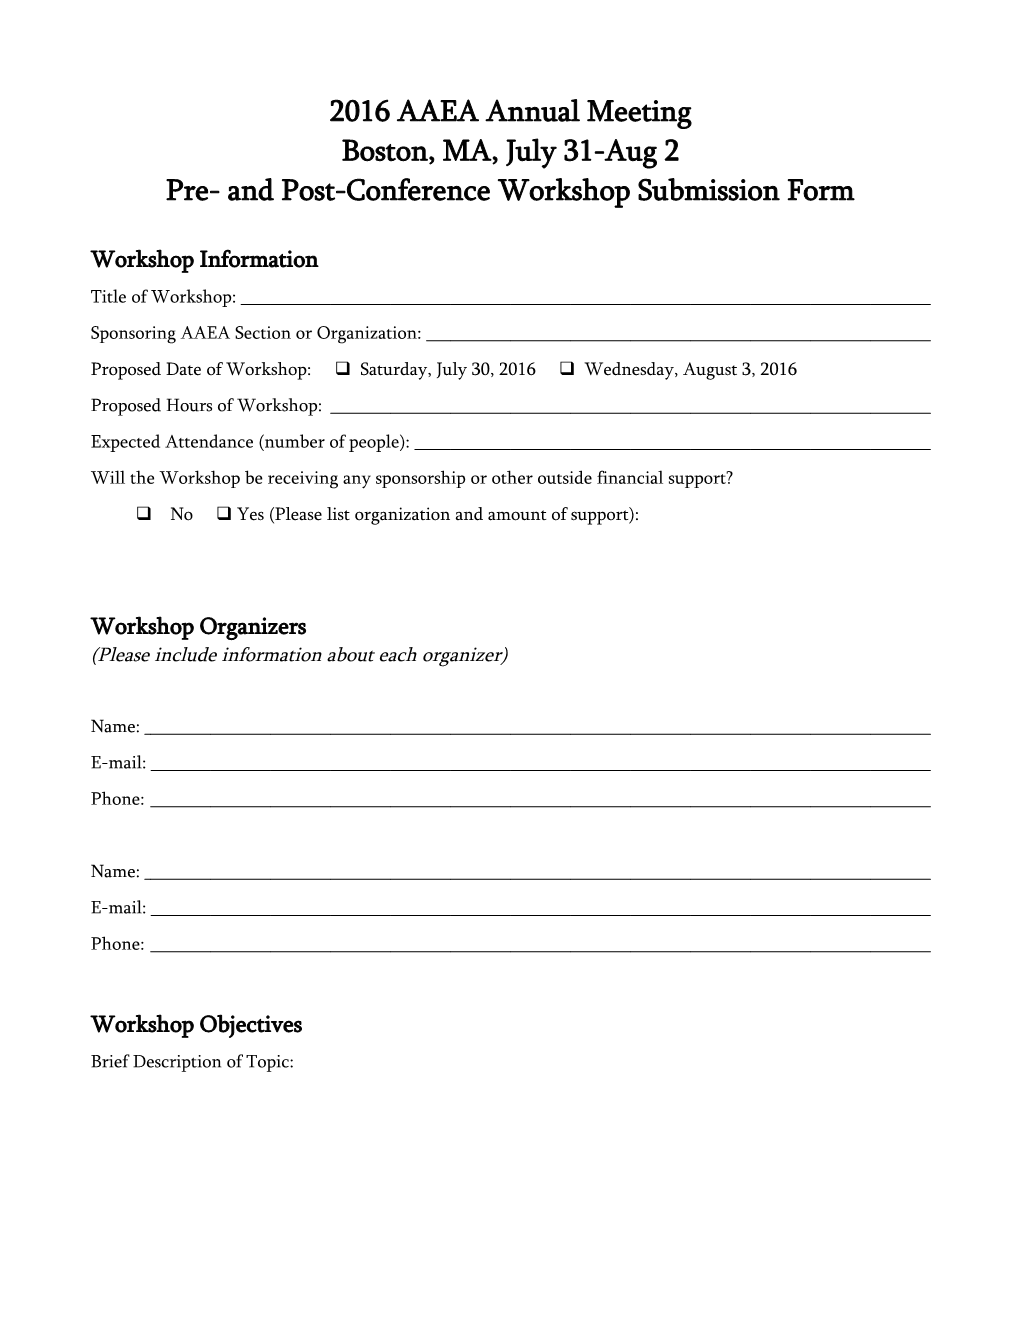 Pre- and Post-Conference Workshop Submission Form